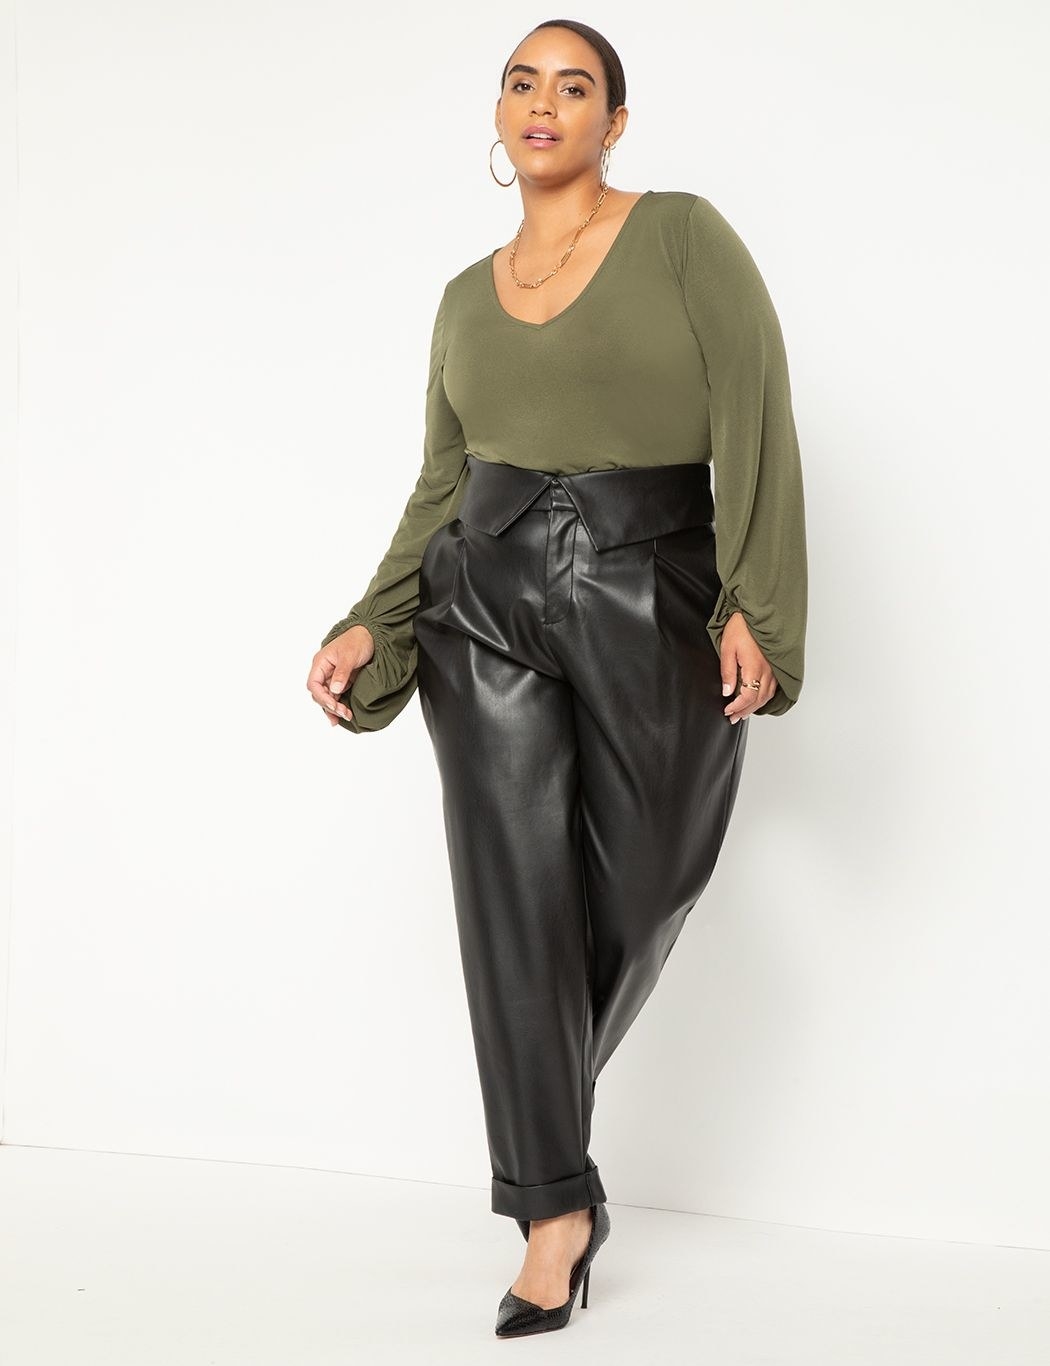 Model wearing faux leather pants with a green blouse and black heels